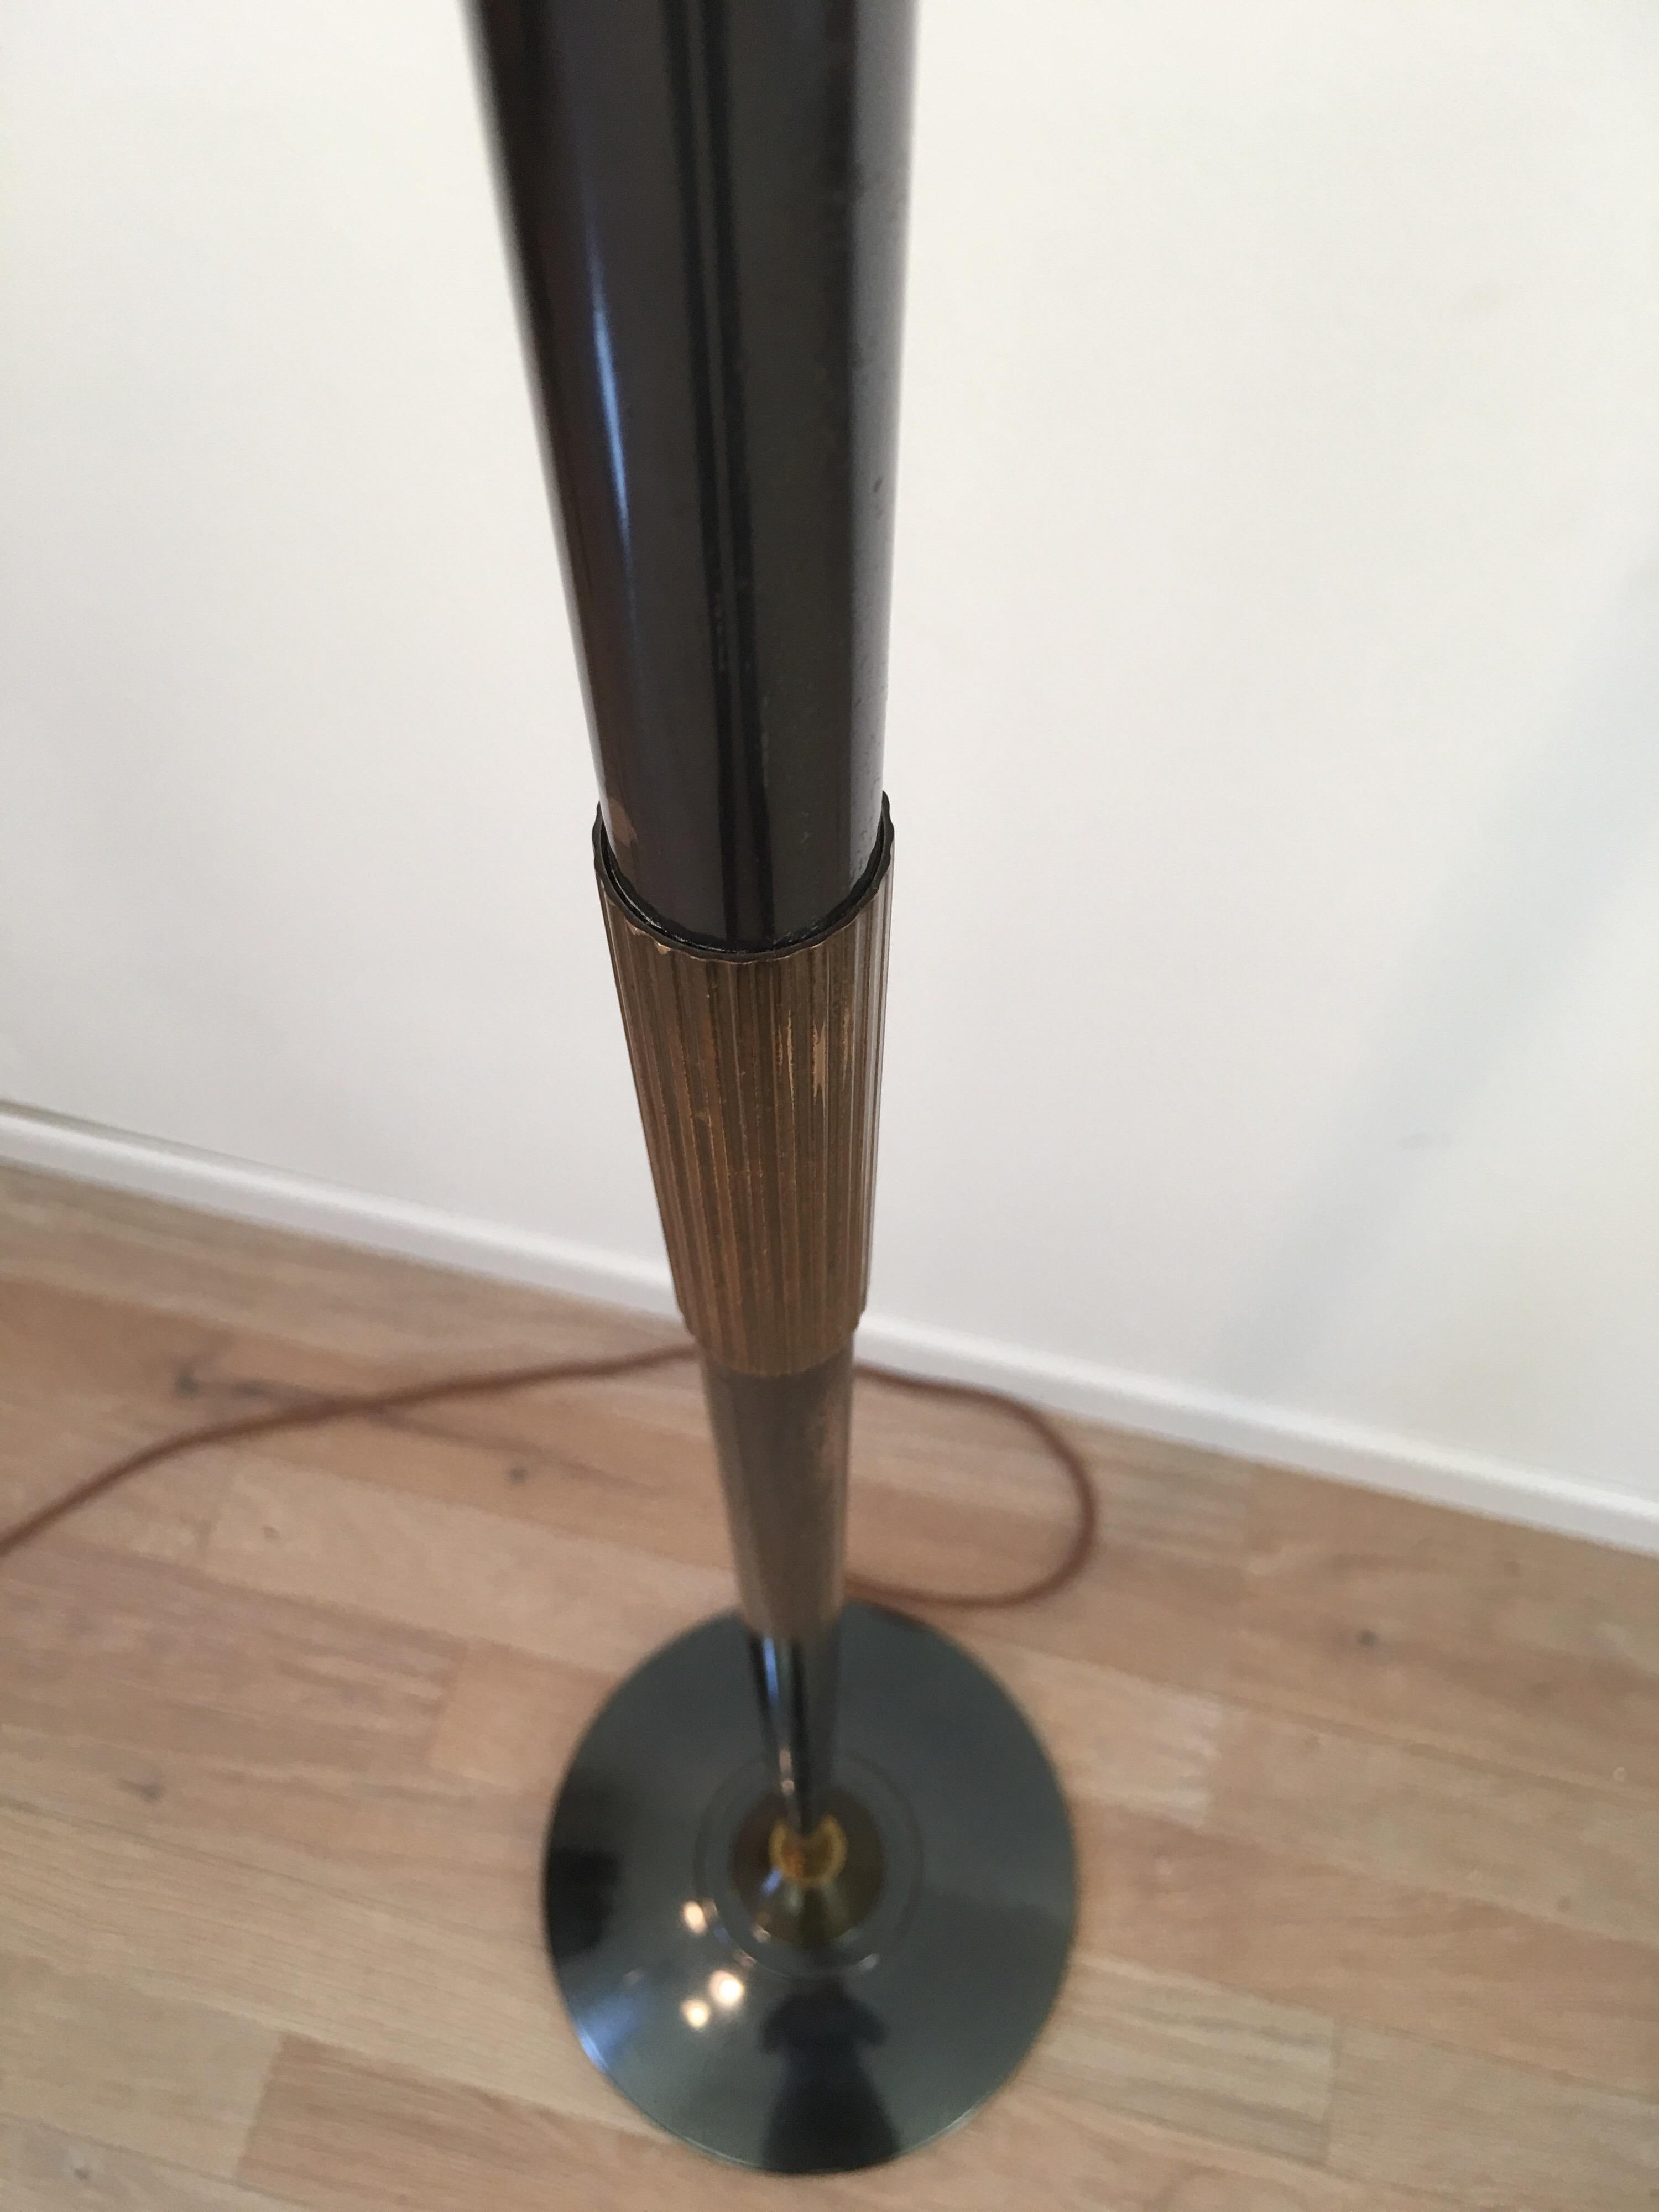 Maison Lunel Gun Metal and Gilt Bronze Patinas Metal Floor Lamp, French, 1950s For Sale 6